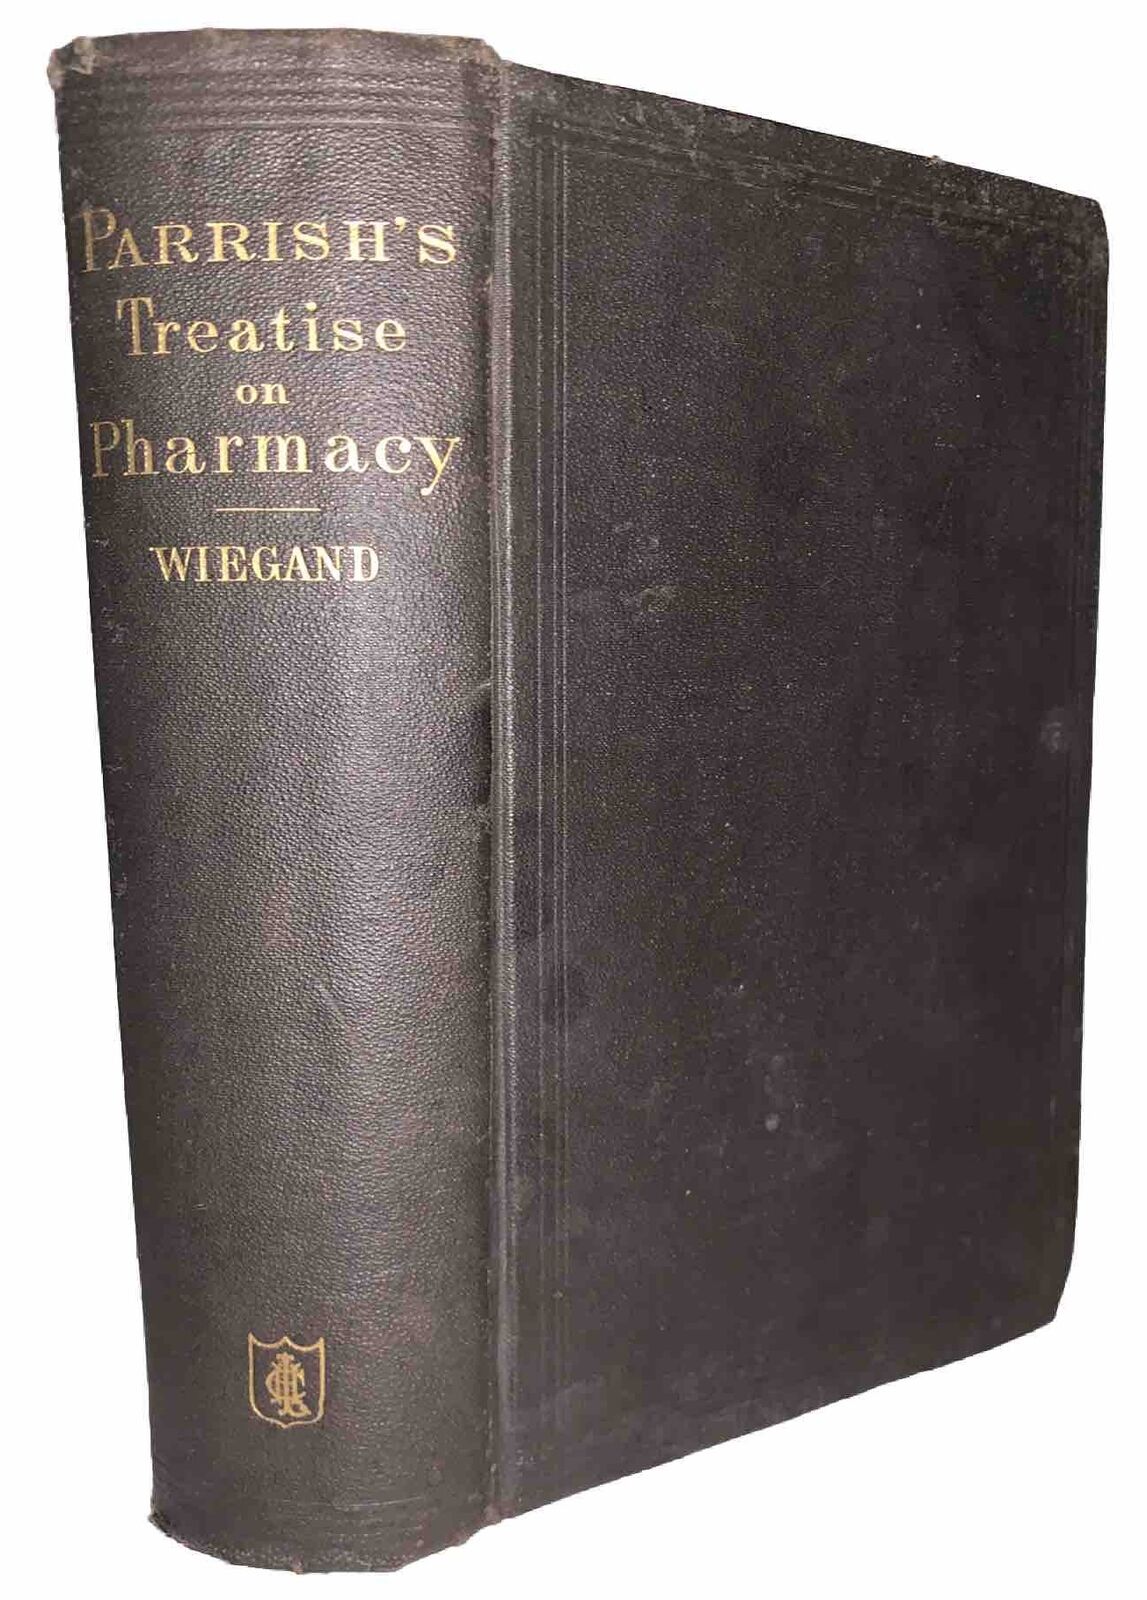 1884, A TREATISE ON PHARMACY, by EDWARD PARRISH, WIEGAND, MEDICAL, MEDICINE